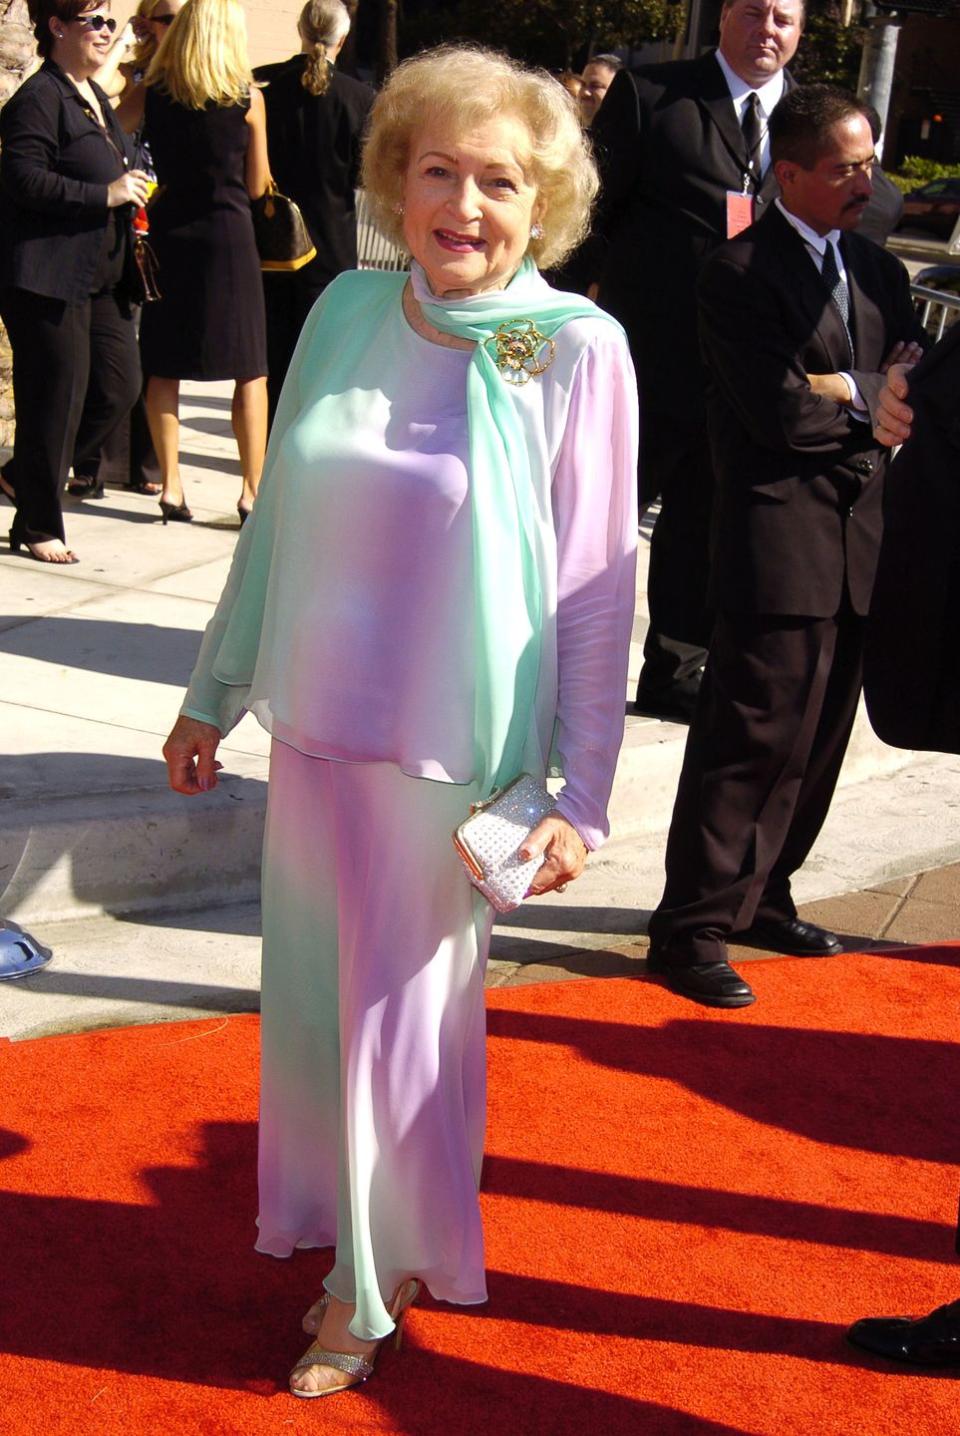 2004: Arriving for the Emmy Awards